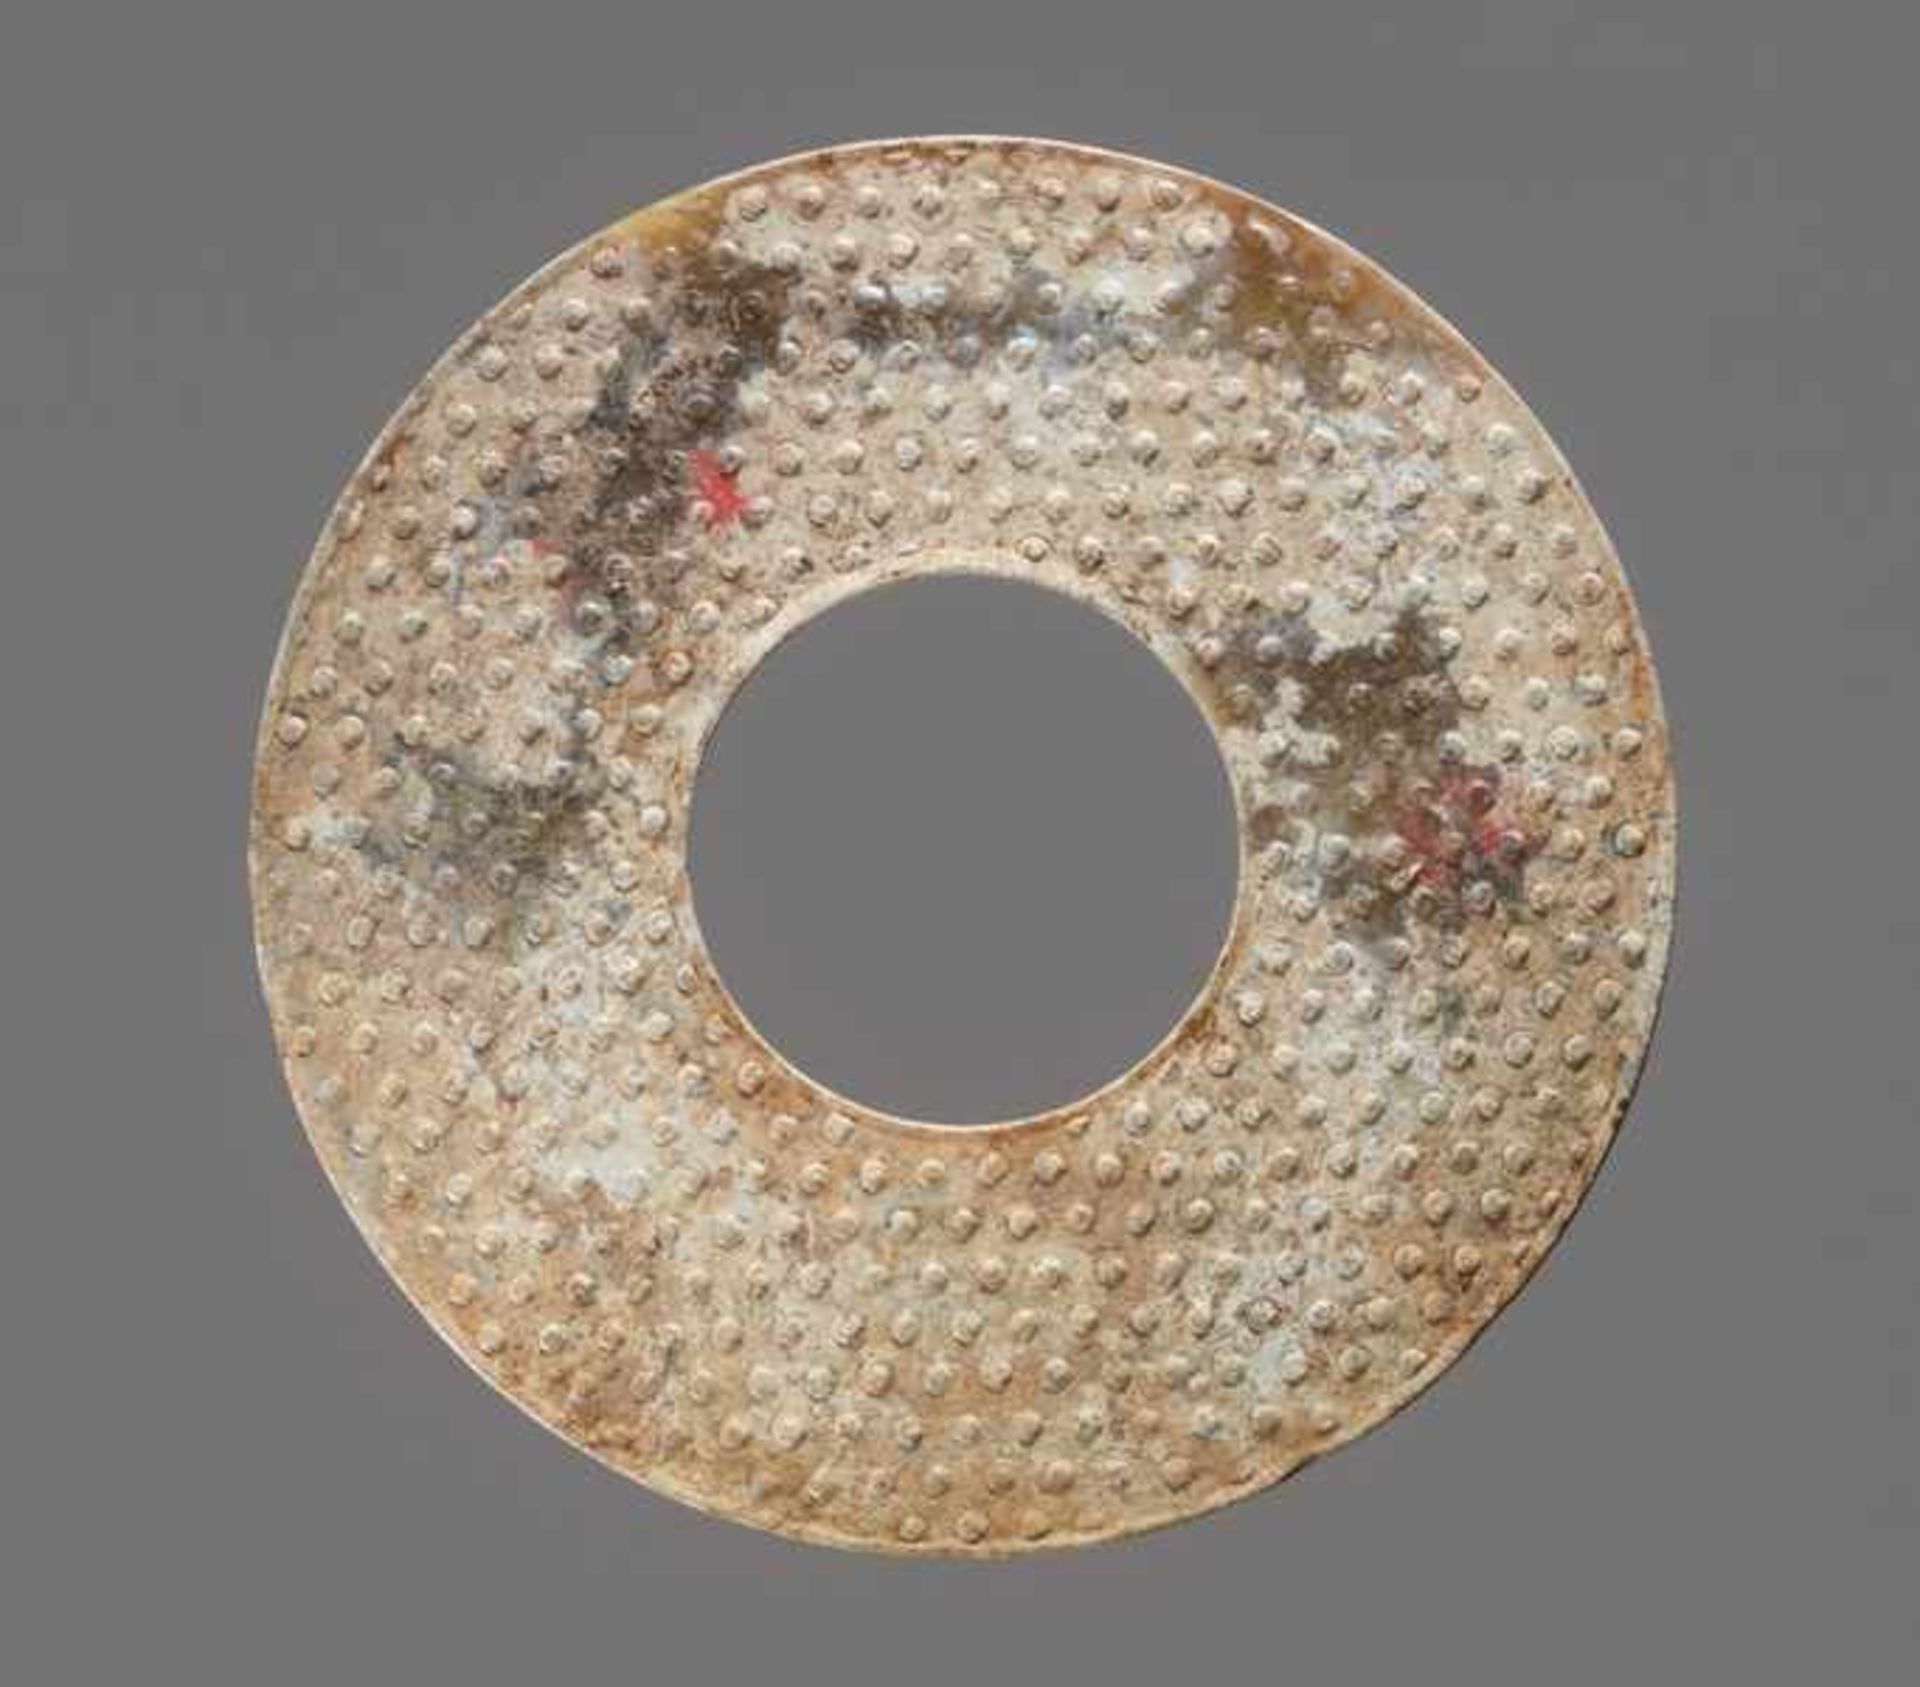 A STRONGLY CALCIFIED BI DISC WITH SCROLLS IN RELIEF Jade. China, Han dynasty, 3rd - 2nd century BC